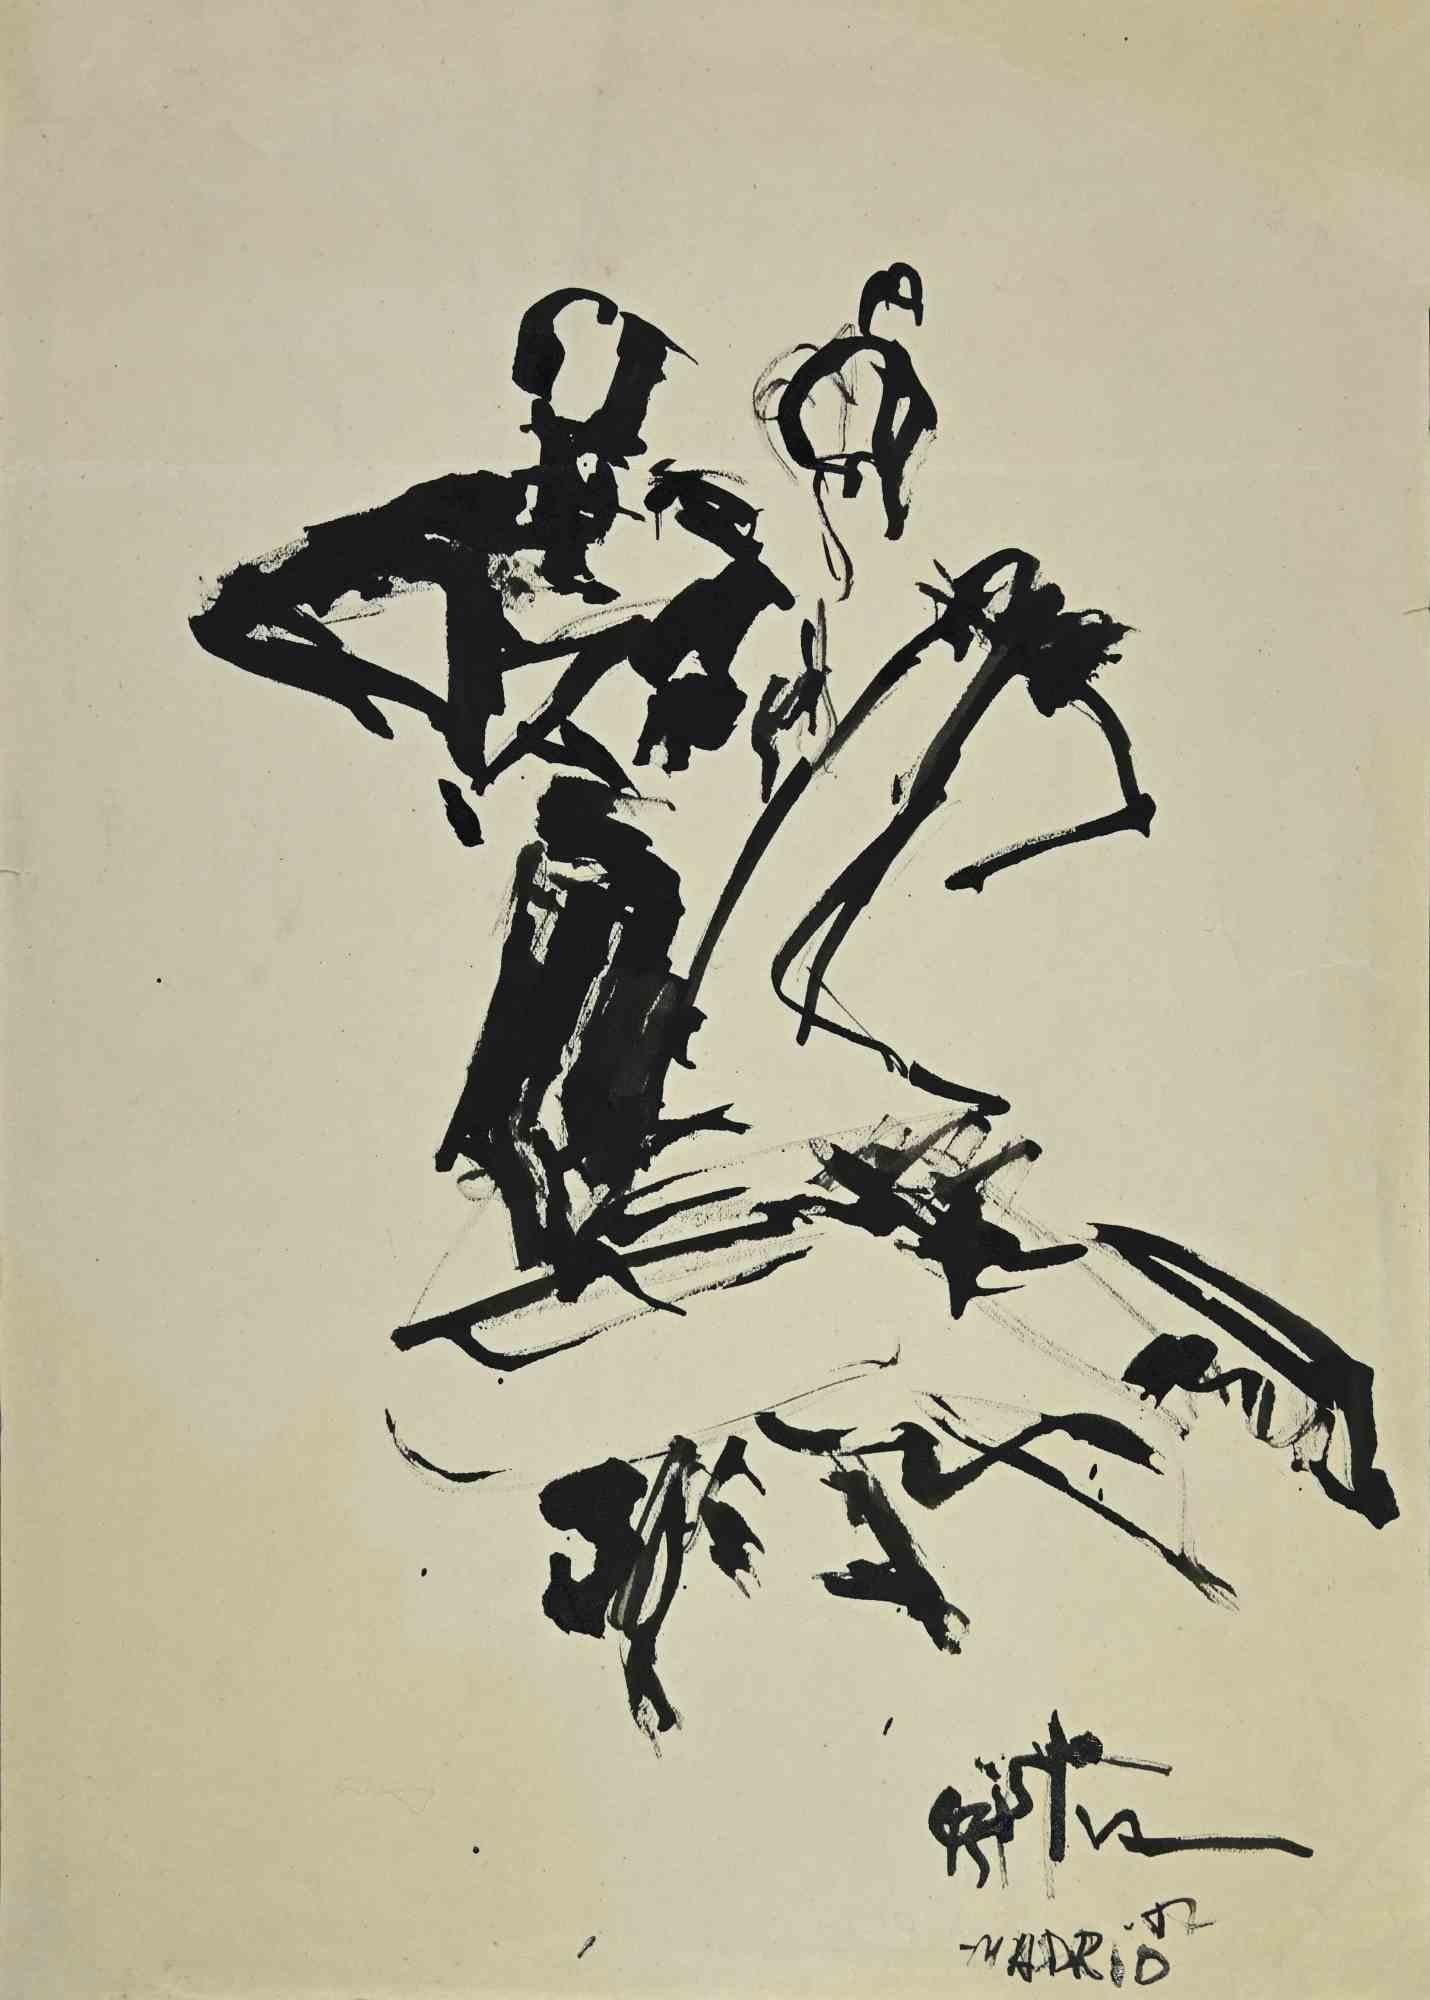 Untitled  is a drawing, realized in  1952,  by the Artist Cristian Uboldi. 

Black and white mixed media on paper. Hand Signed and dated on the right corner.

The artist wants to define a well-balanced composition, through preciseness and congruous